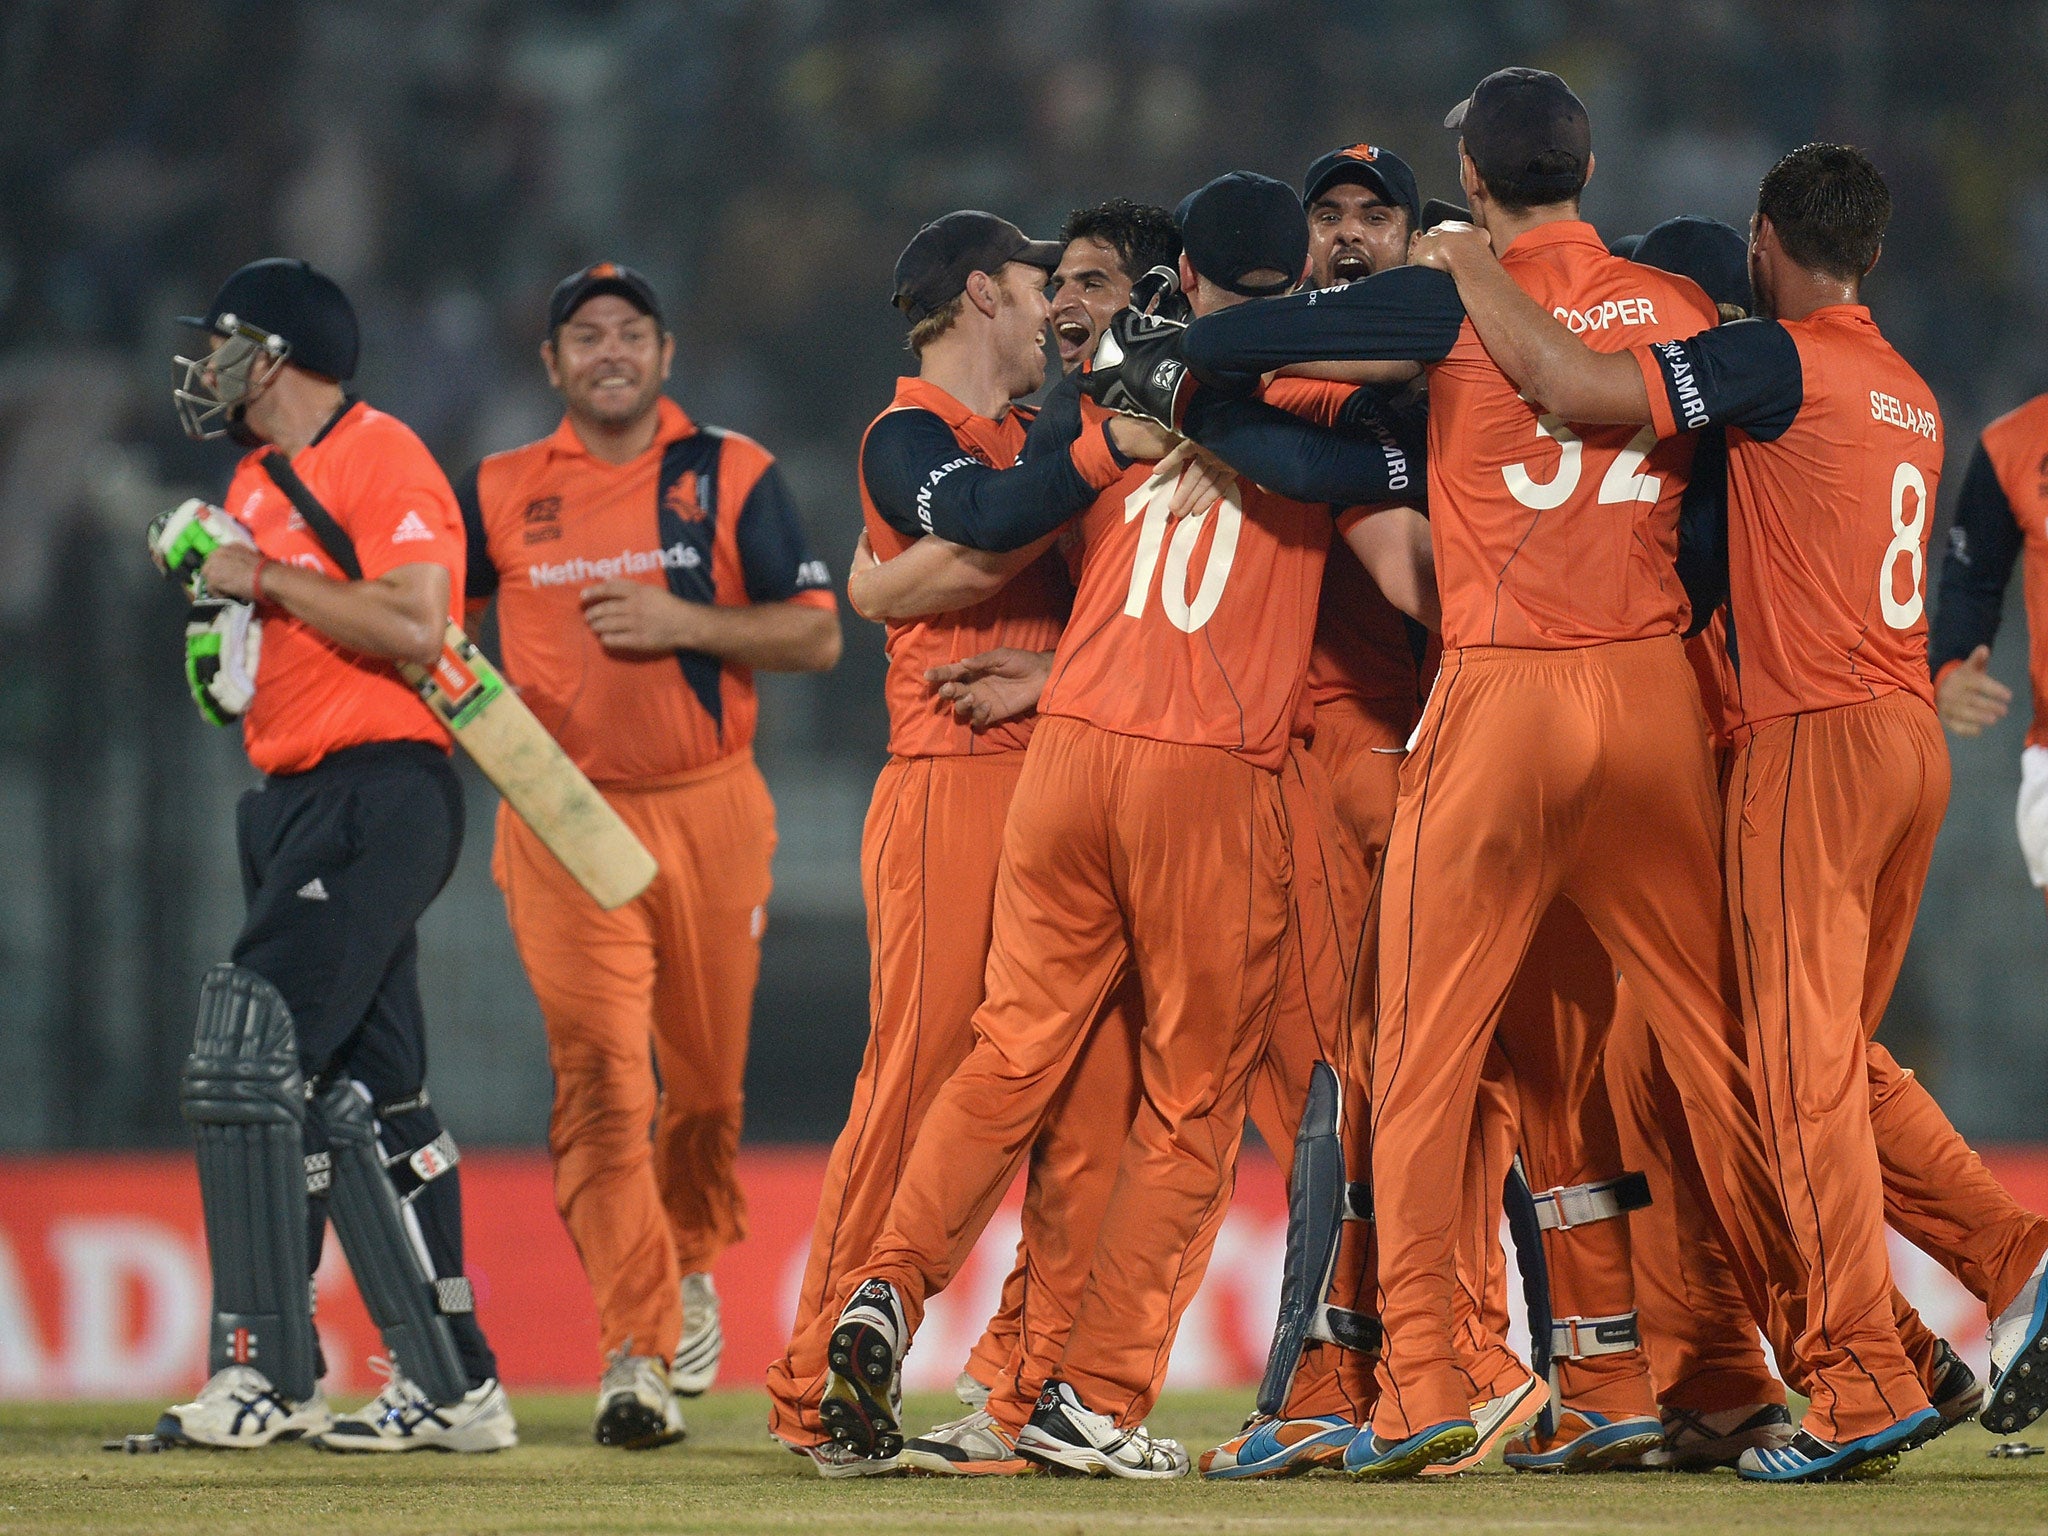 Netherlands players celebrate the final wicket of James Tredwell of England to win the ICC World Twenty20 match